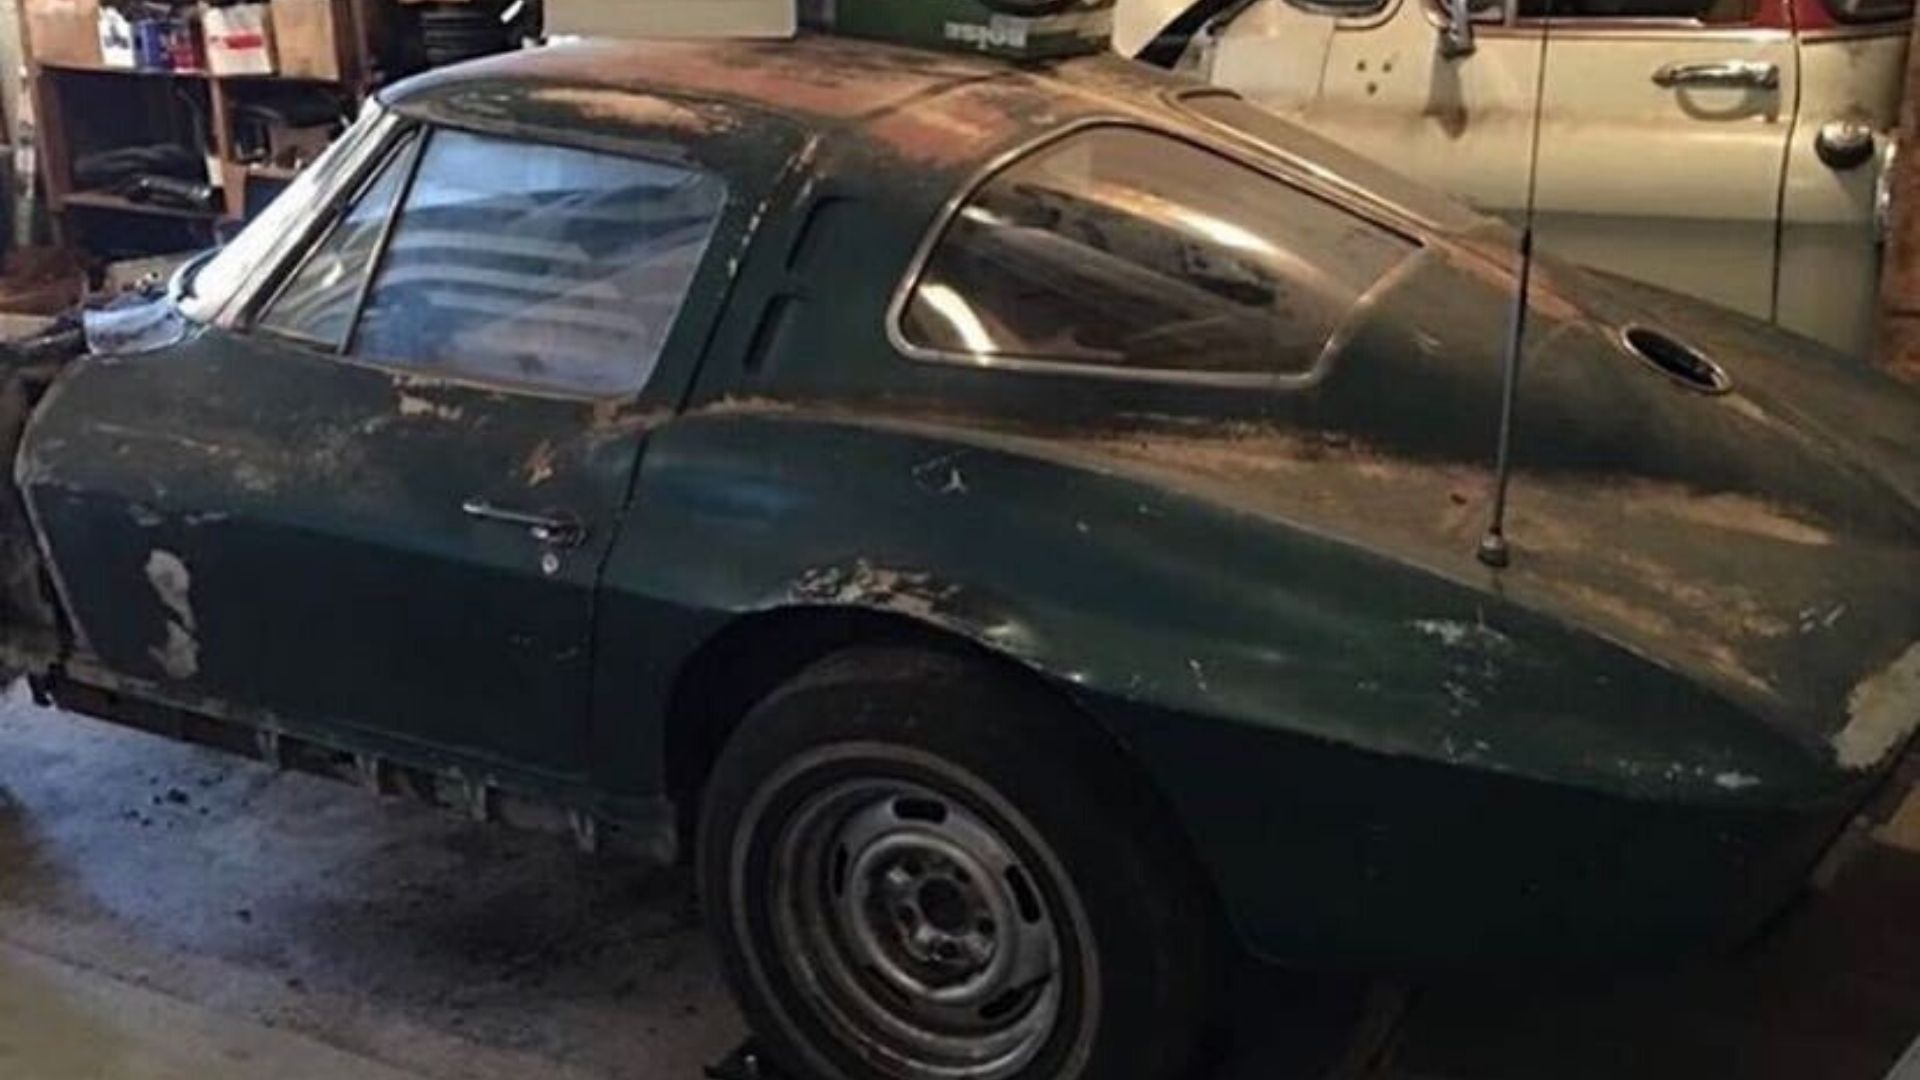 news, sports, american, newsletter, highlights, muscle, handpicked, client, classic, modern classic, europe, features, luxury, trucks, celebrity, off-road, german, someone junked this 1963 corvette z06 split window